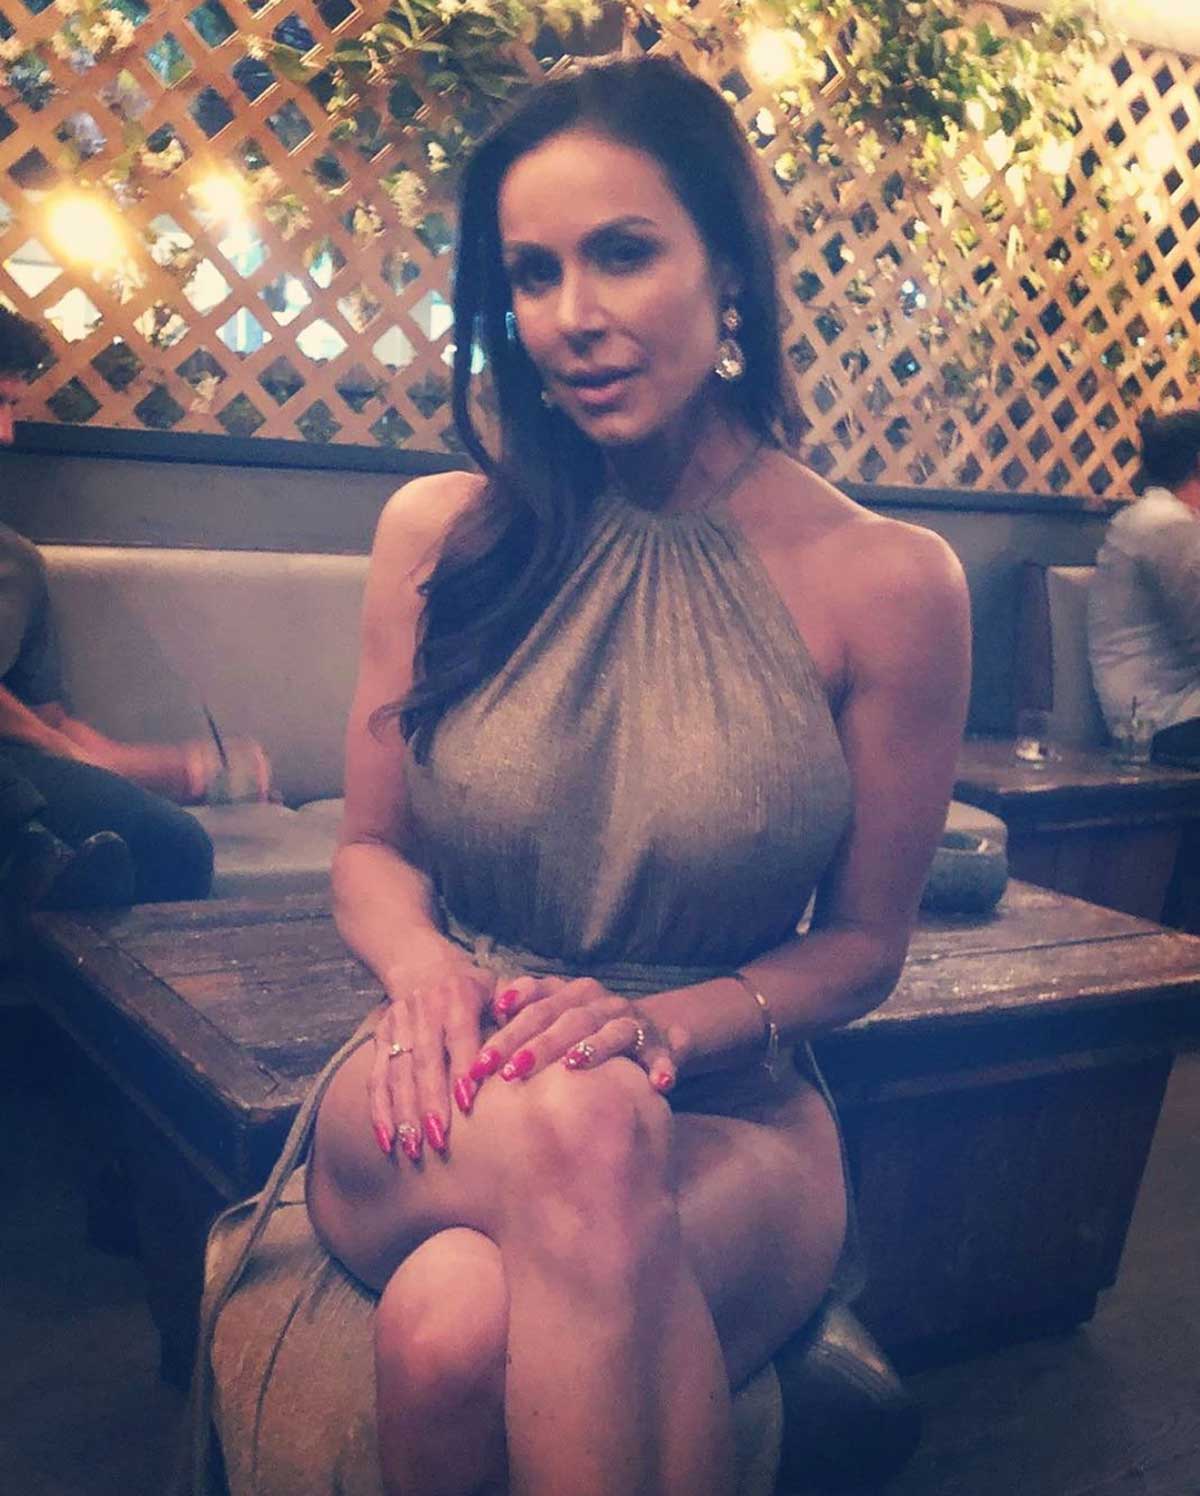 In 23rd place is 42-year-old Kendra Lust (real name: Michelle Anne Mason) from Madison Heights, MI. Check her out on <a rel="nofollow" href="https://www.instagram.com/kendralust/">Instagram</a> | <a rel="nofollow" href="https://twitter.com/kendralust">Twitter</a>